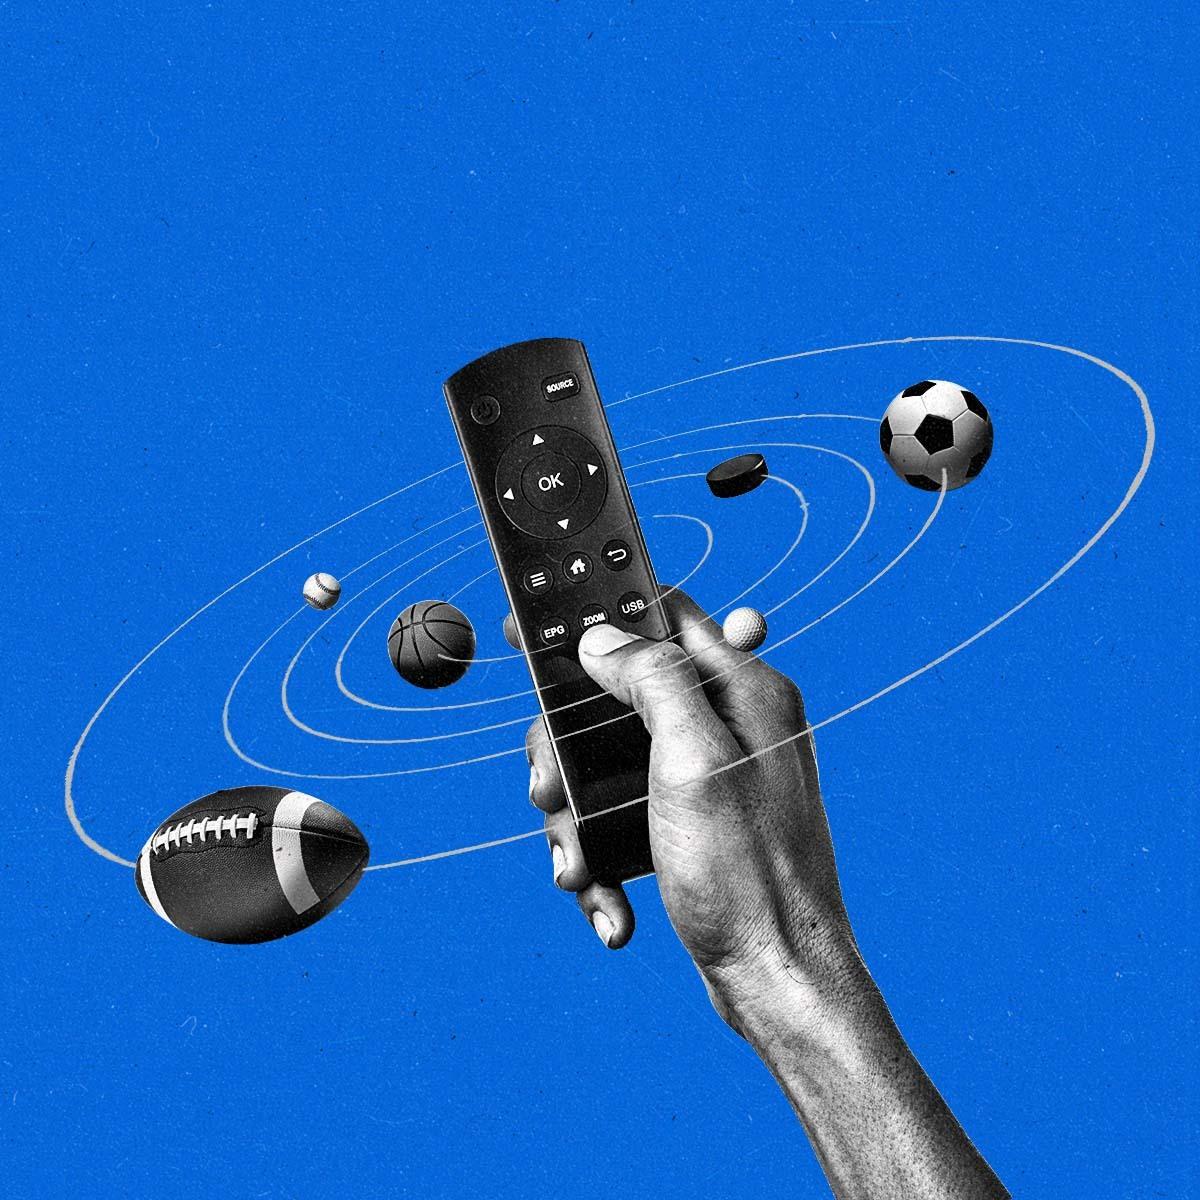 A solar system of balls from various sports orbits around a hand holding a TV remote control.